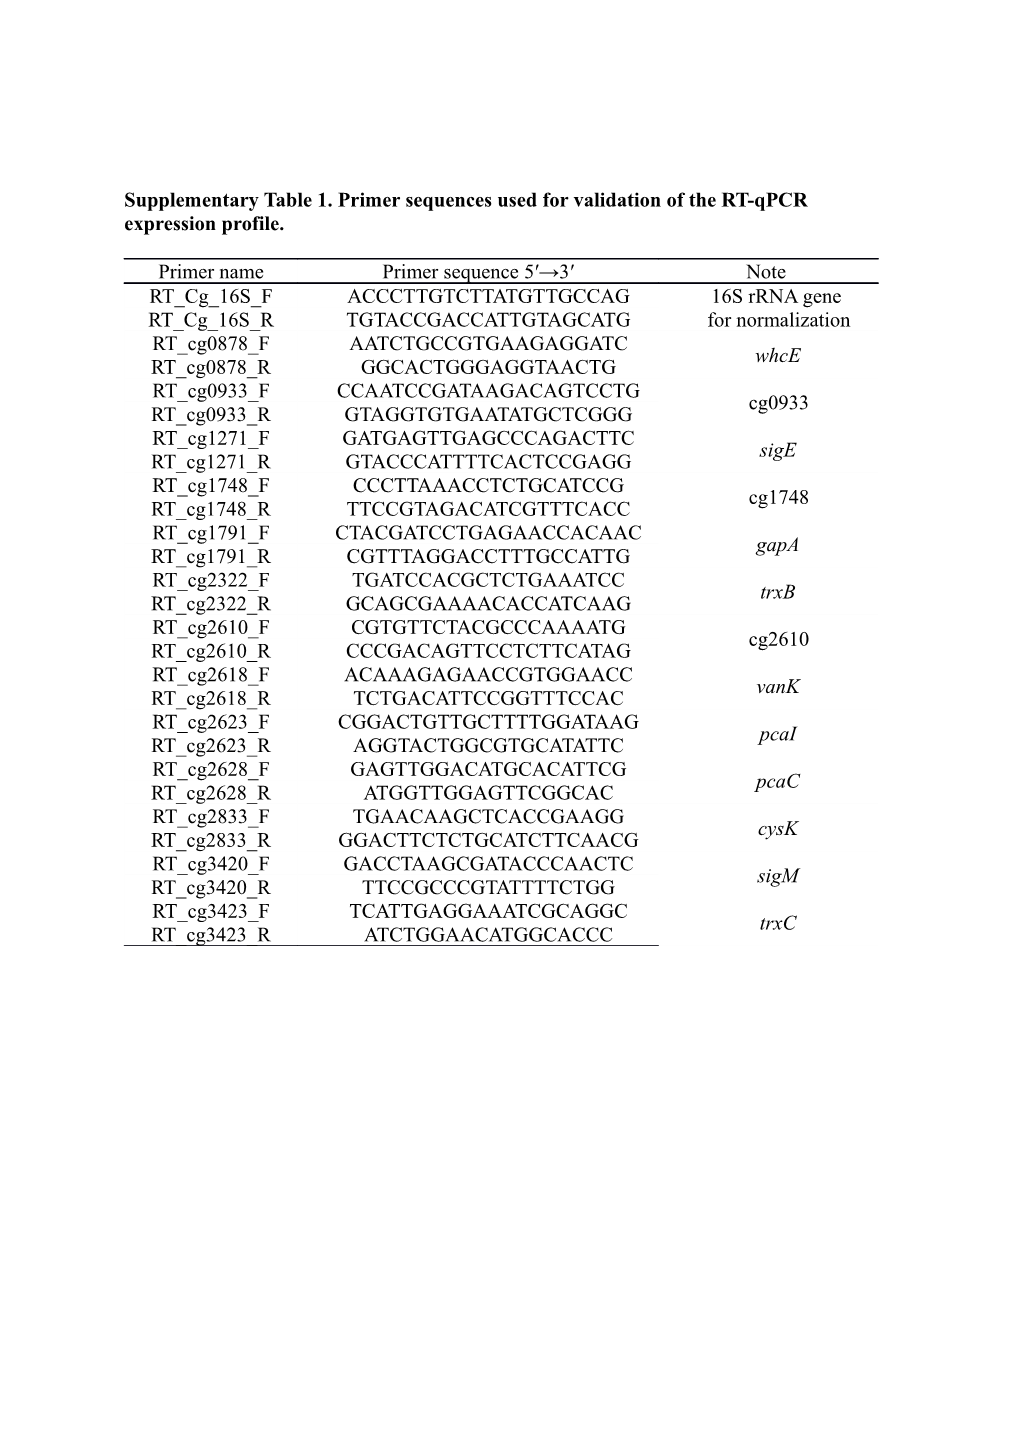 Supplementary Table 1. Primer Sequences Used for Validation of the RT-Qpcr Expression Profile